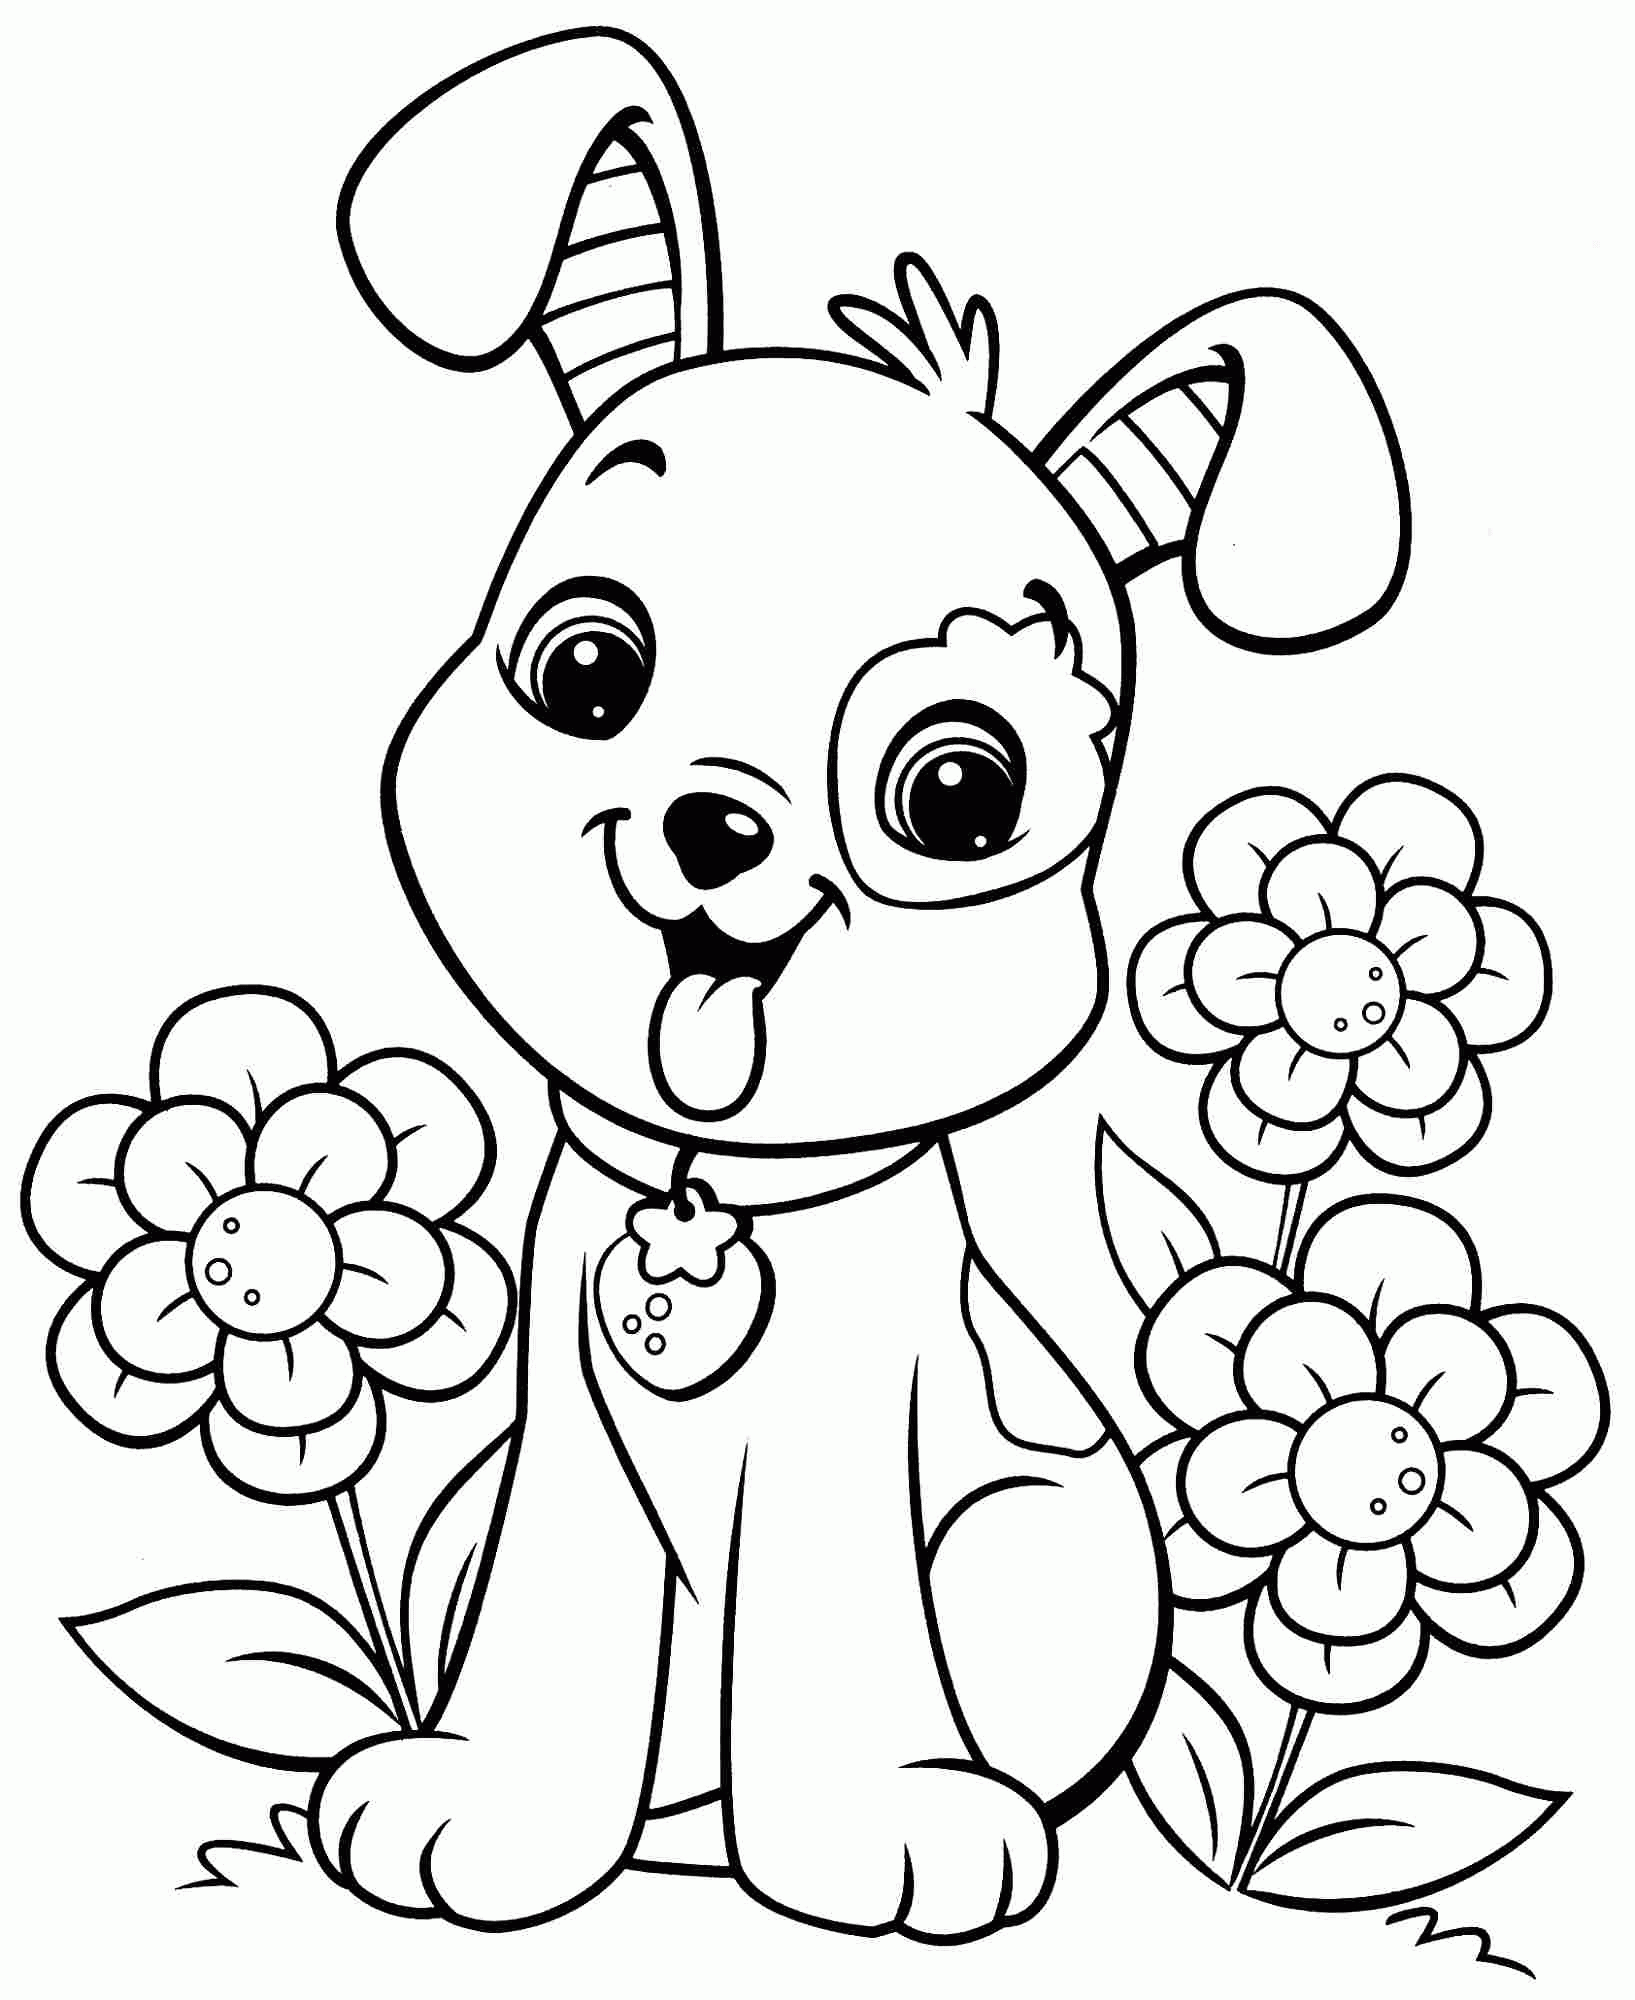 Printable Coloring Pages Cartoon Animals   High Quality Coloring ...